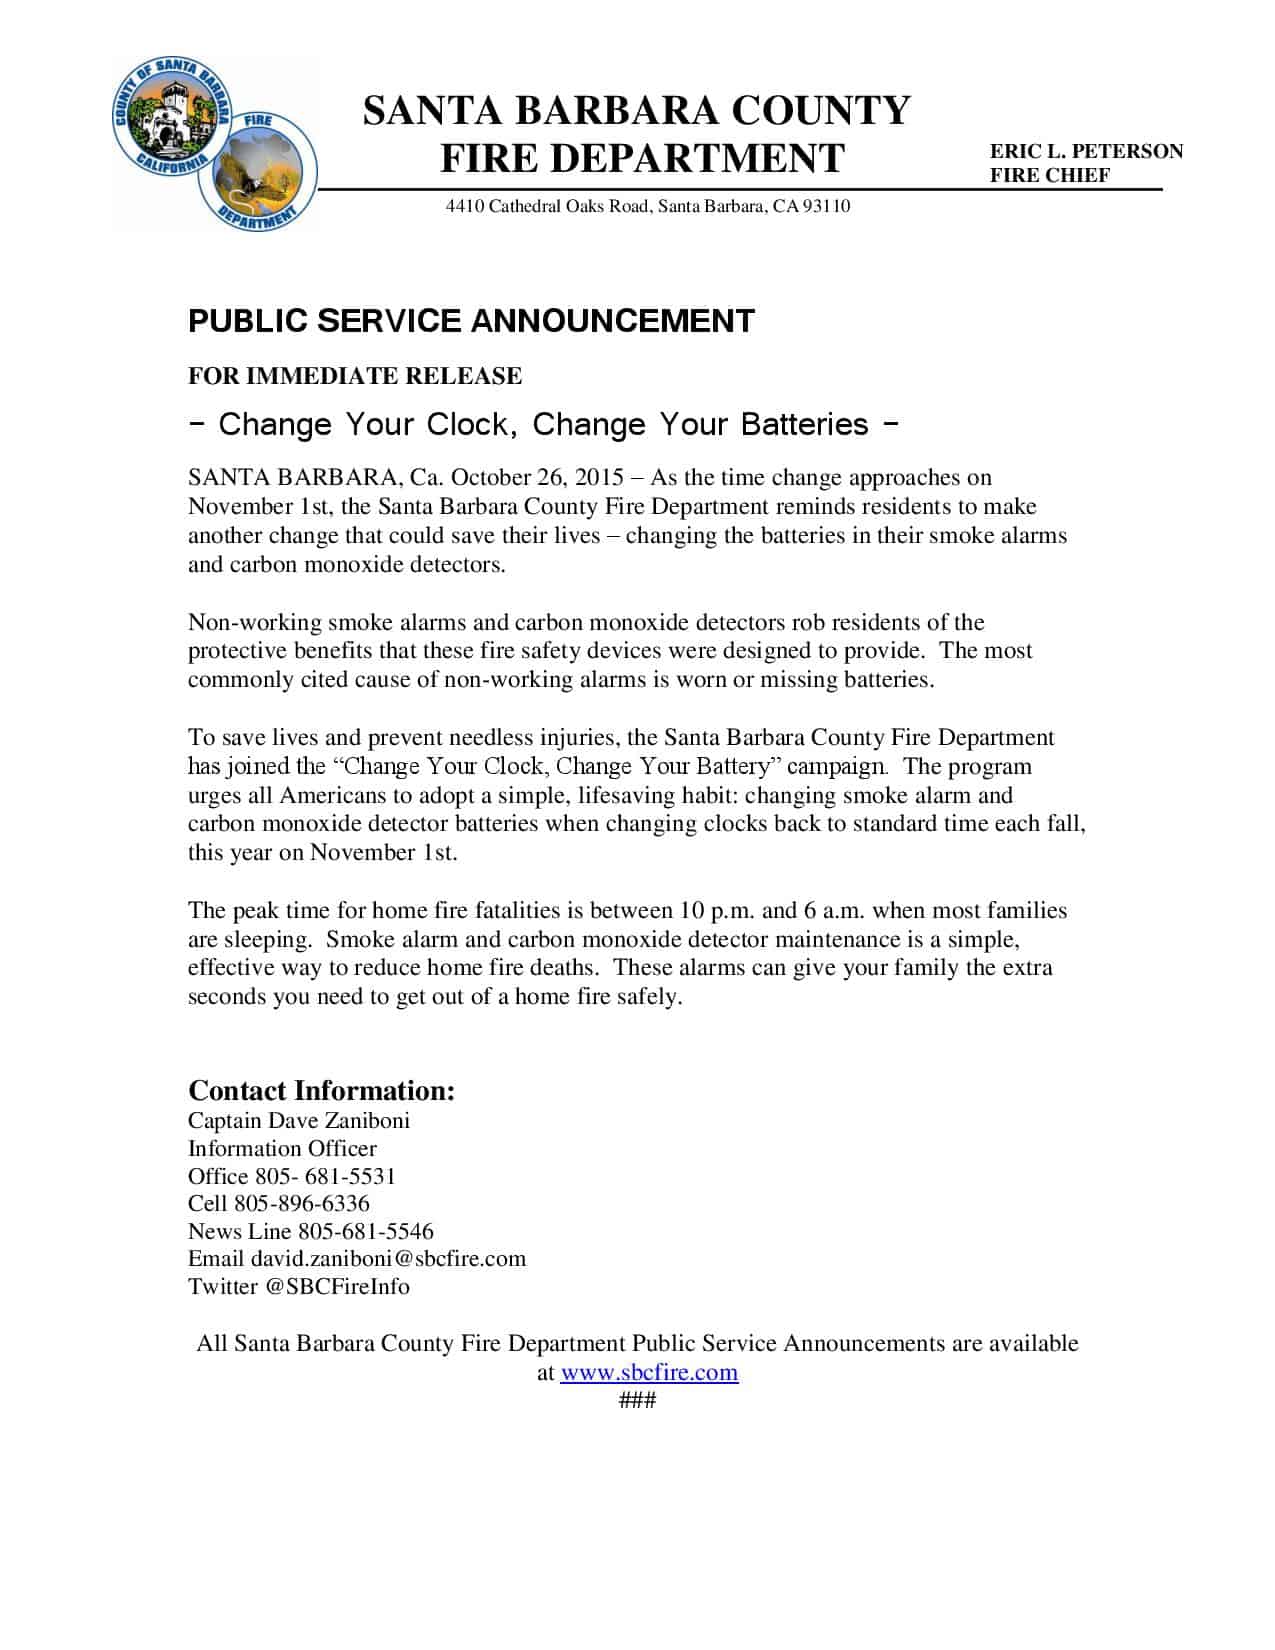 Change Your Clock and Batteries PSA